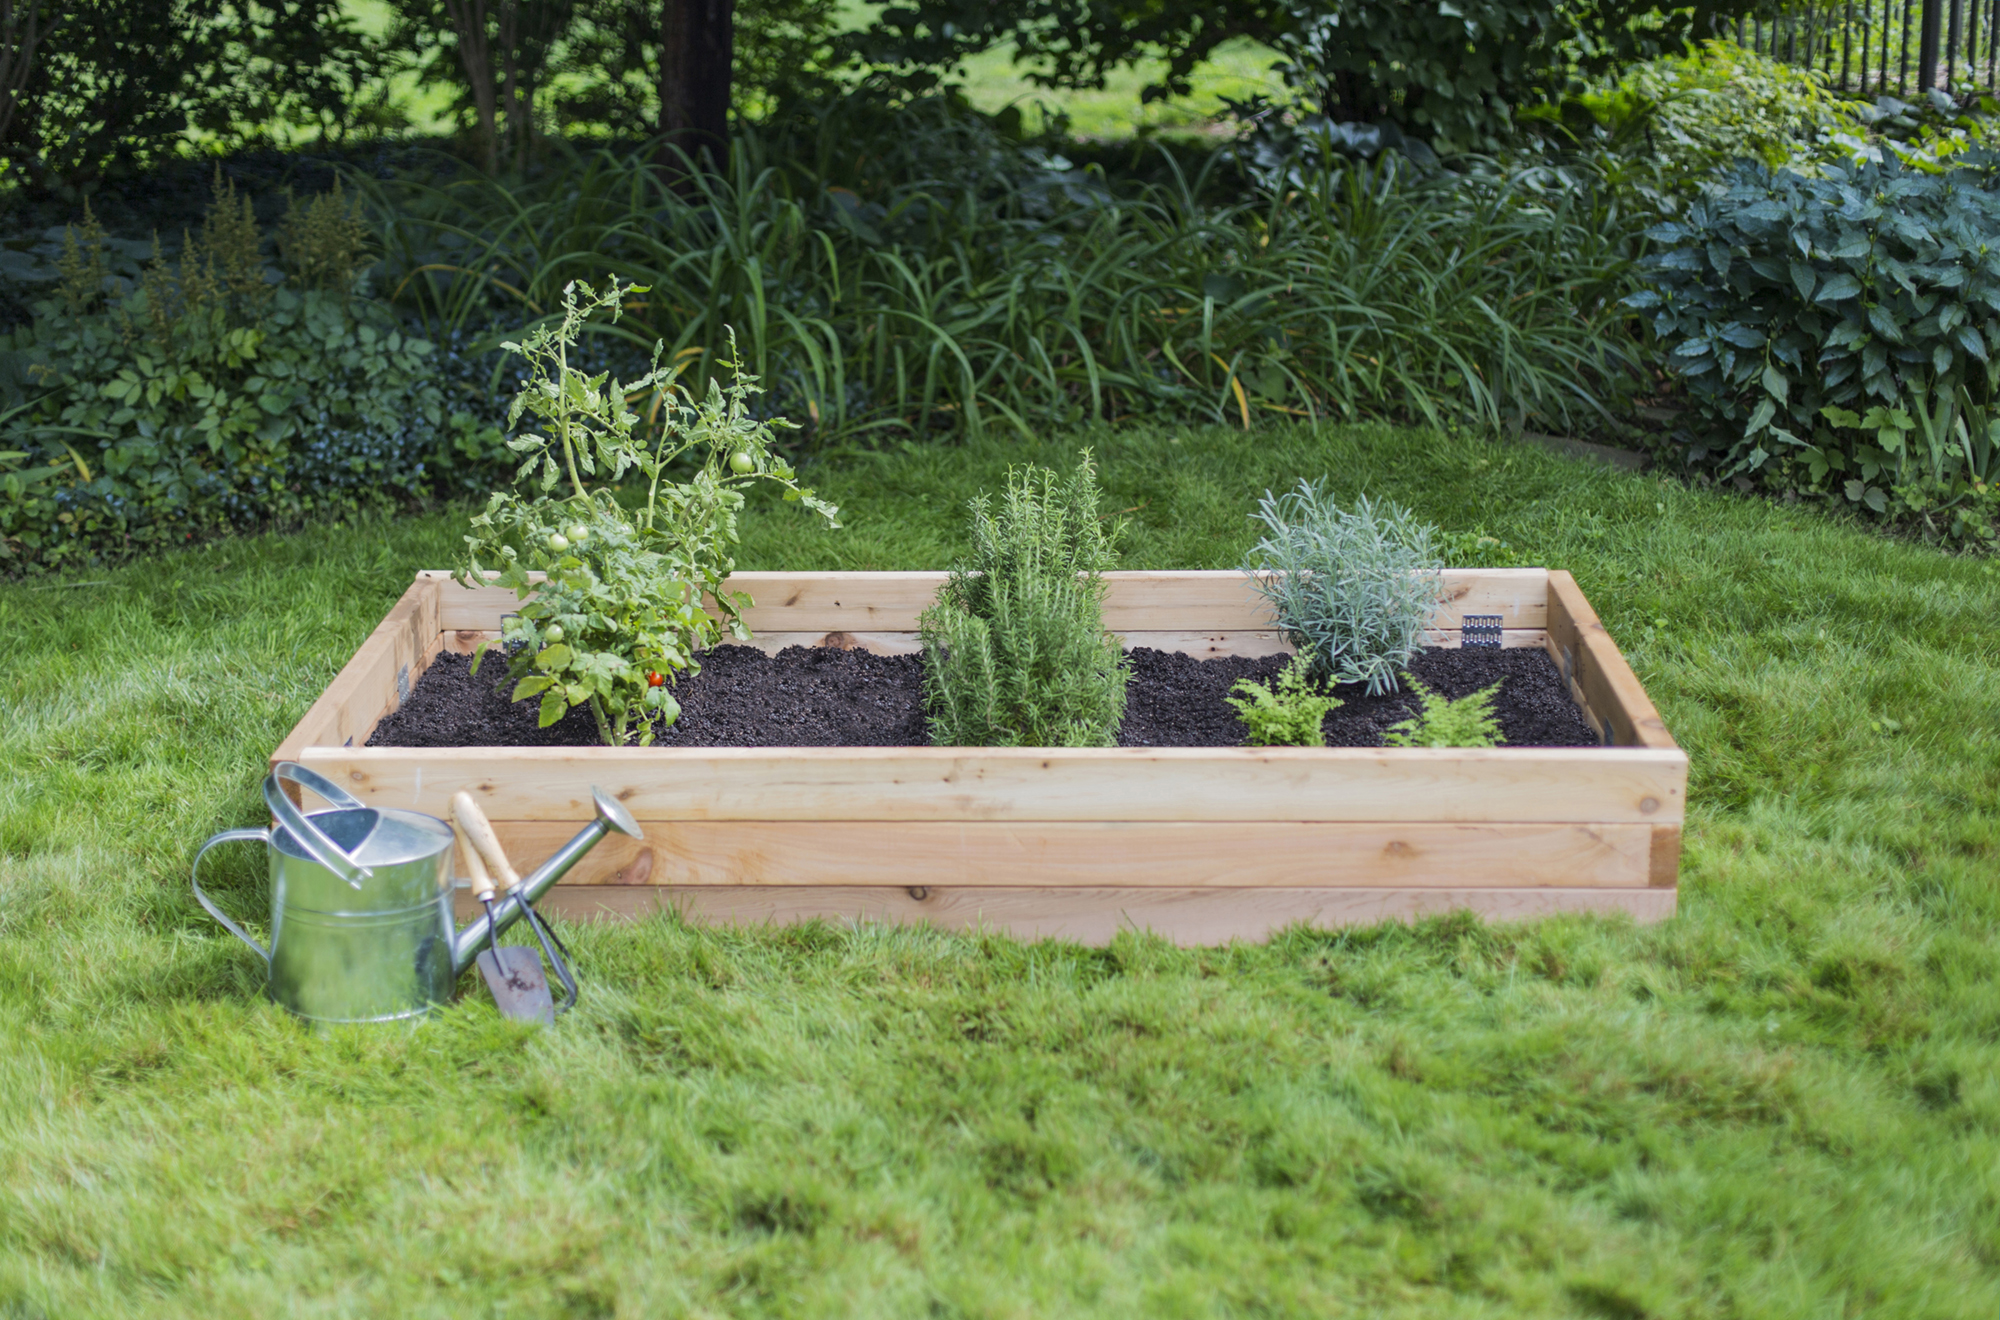 Why I Stopped Using Raised Garden Beds - The Seasonal Homestead